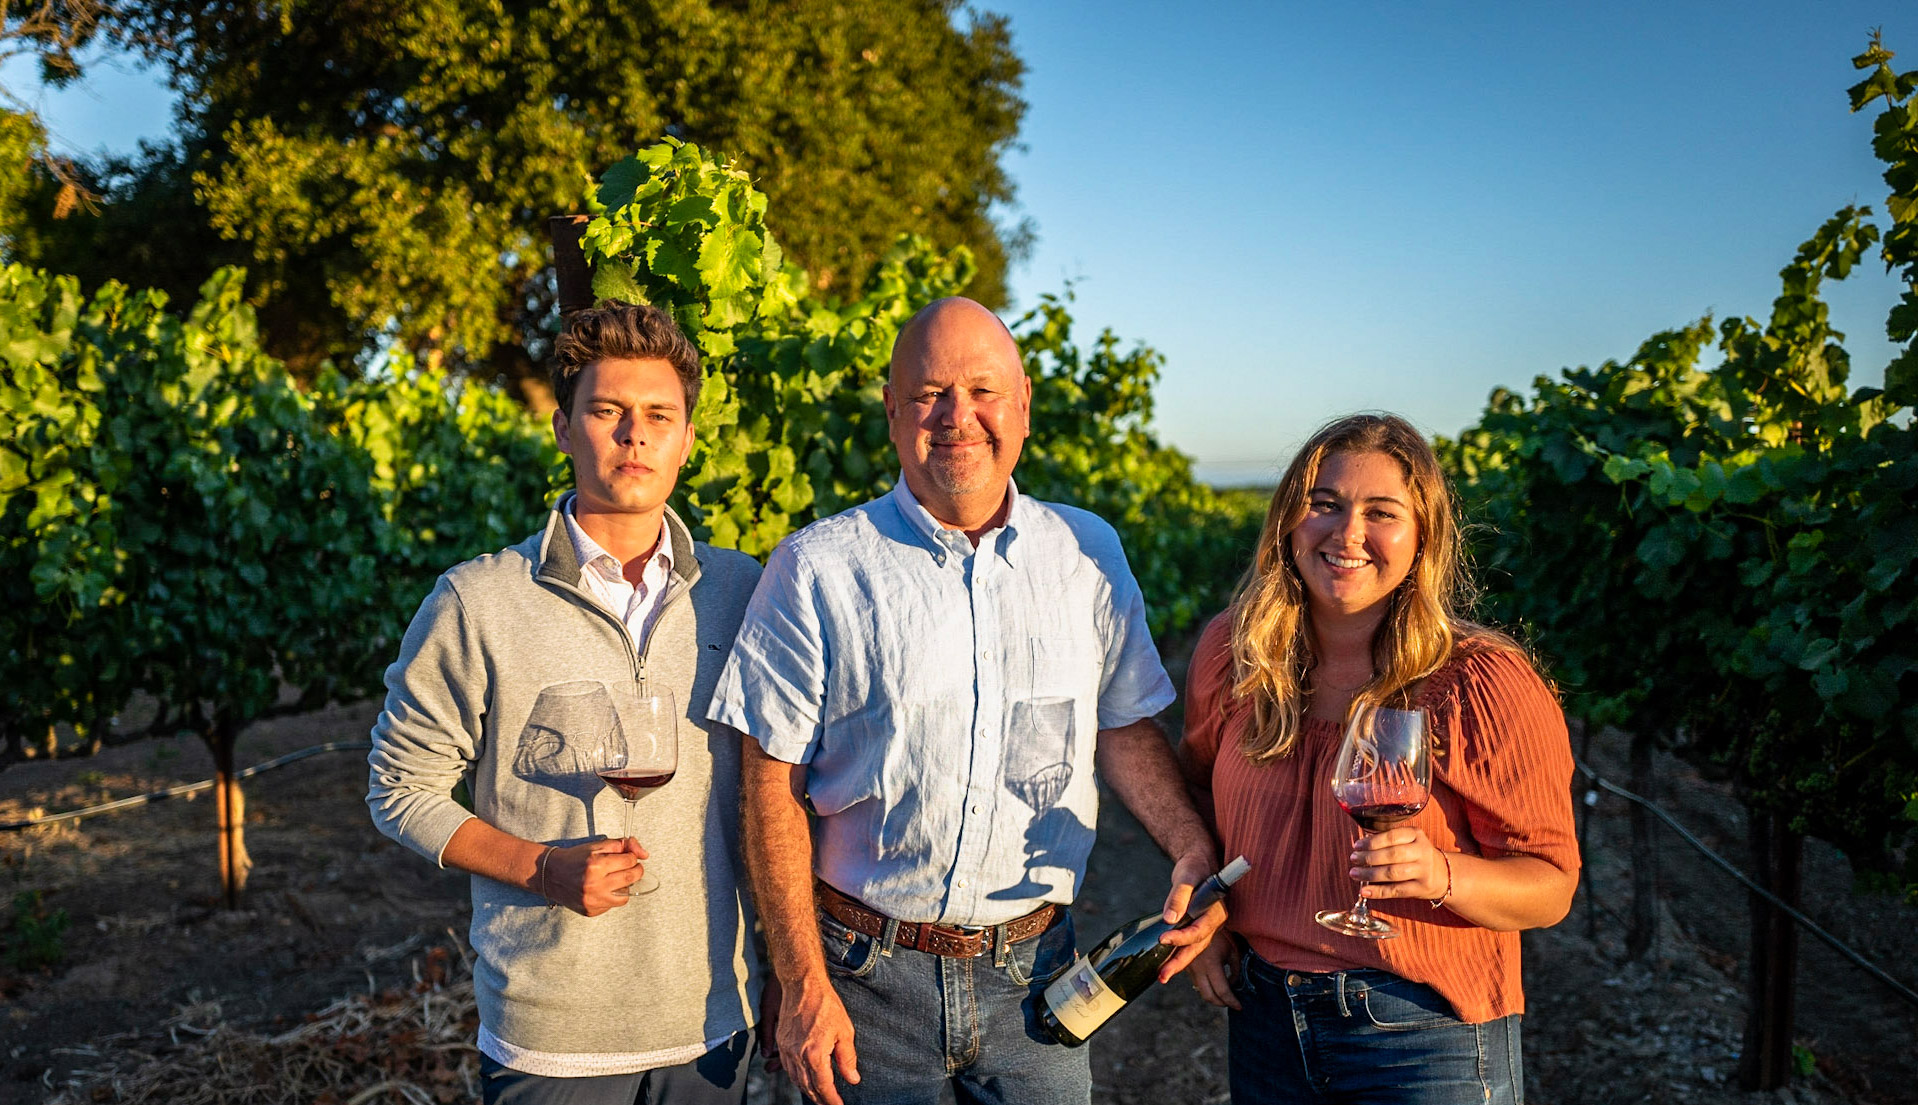 Dearden Family in the vineyard with wine glasses